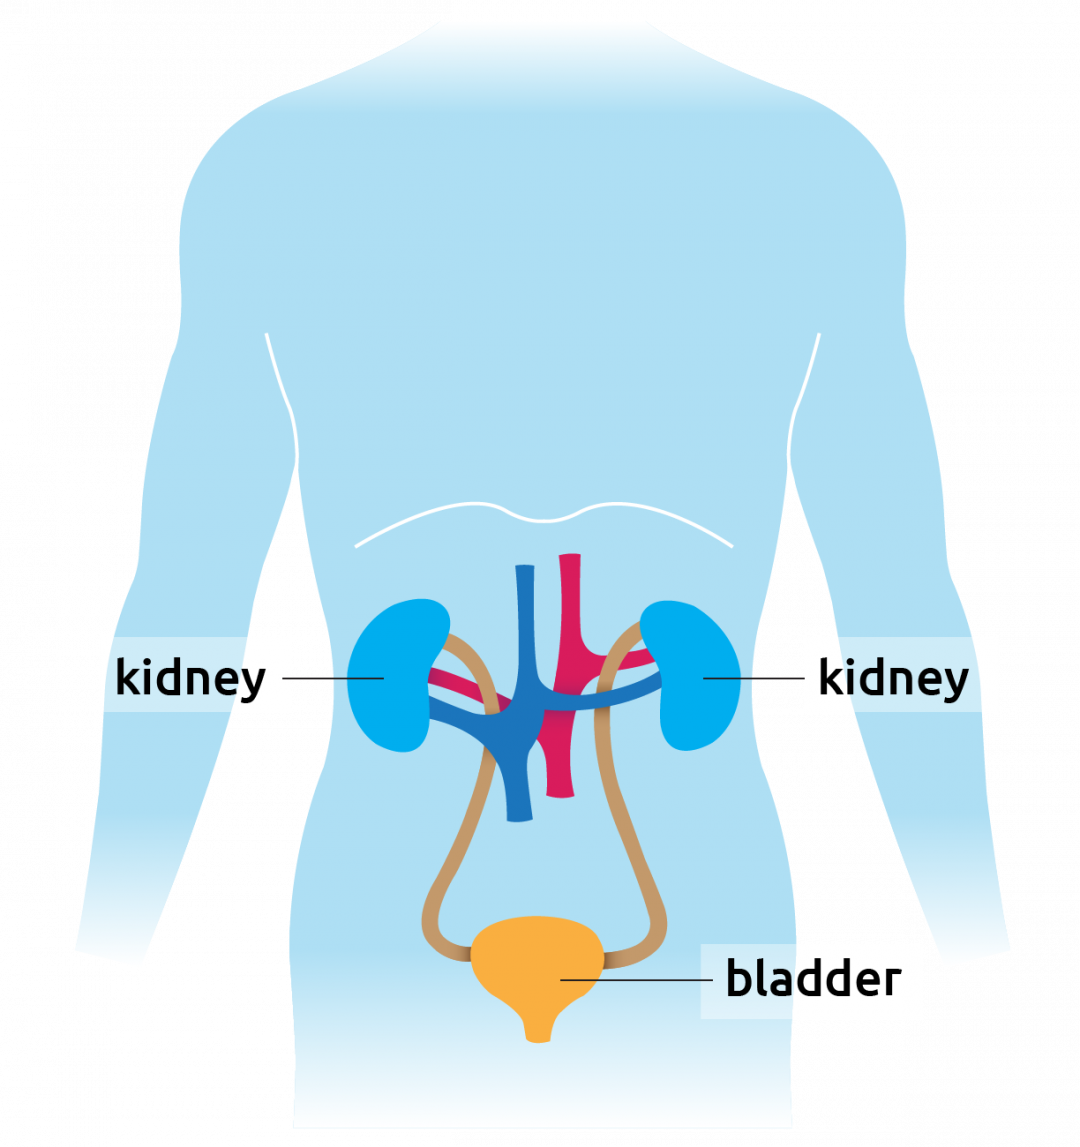 What are kidneys? - Transplant Living